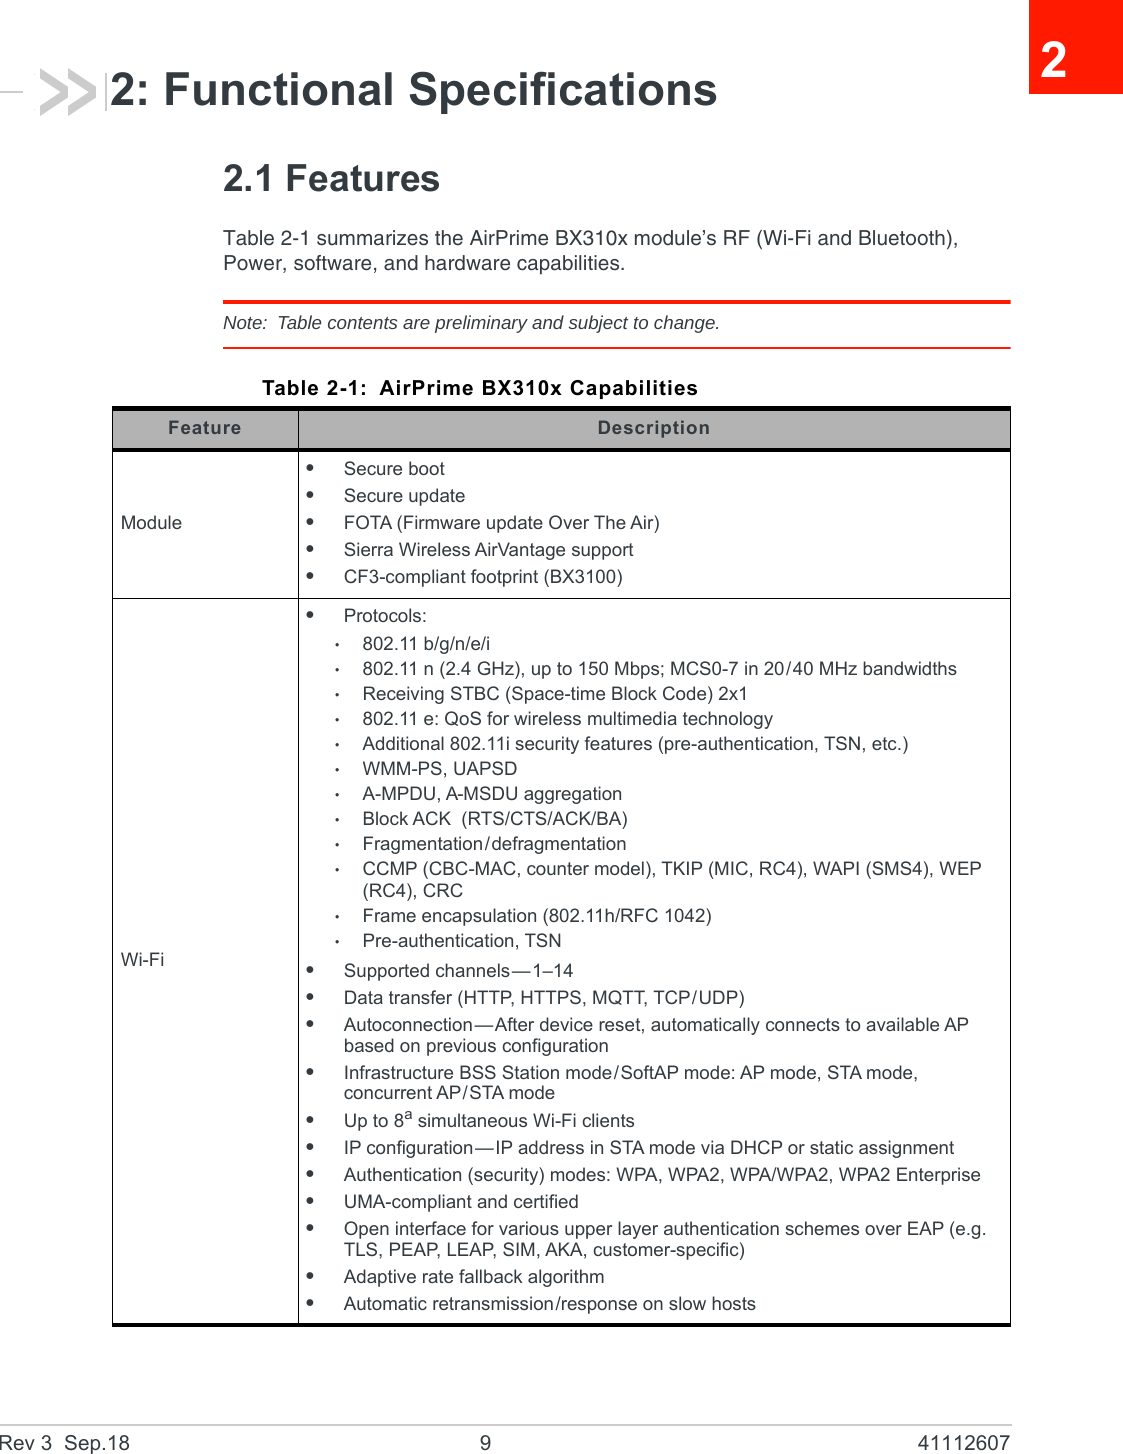 Rev 3  Sep.18 9 4111260722: Functional Specifications2.1 FeaturesTable 2-1 summarizes the AirPrime BX310x module’s RF (Wi-Fi and Bluetooth), Power, software, and hardware capabilities.Note: Table contents are preliminary and subject to change.Table 2-1: AirPrime BX310x CapabilitiesFeature DescriptionModule•Secure boot•Secure update•FOTA (Firmware update Over The Air)•Sierra Wireless AirVantage support•CF3-compliant footprint (BX3100)Wi-Fi•Protocols:·802.11 b/g/n/e/i·802.11 n (2.4 GHz), up to 150 Mbps; MCS0-7 in 20/40 MHz bandwidths·Receiving STBC (Space-time Block Code) 2x1·802.11 e: QoS for wireless multimedia technology·Additional 802.11i security features (pre-authentication, TSN, etc.)·WMM-PS, UAPSD·A-MPDU, A-MSDU aggregation·Block ACK  (RTS/CTS/ACK/BA)·Fragmentation/defragmentation·CCMP (CBC-MAC, counter model), TKIP (MIC, RC4), WAPI (SMS4), WEP (RC4), CRC·Frame encapsulation (802.11h/RFC 1042)·Pre-authentication, TSN•Supported channels—1–14•Data transfer (HTTP, HTTPS, MQTT, TCP/UDP)•Autoconnection—After device reset, automatically connects to available AP based on previous configuration•Infrastructure BSS Station mode/SoftAP mode: AP mode, STA mode, concurrent AP/STA mode •Up to 8asimultaneous Wi-Fi clients•IP configuration—IP address in STA mode via DHCP or static assignment•Authentication (security) modes: WPA, WPA2, WPA/WPA2, WPA2 Enterprise•UMA-compliant and certified•Open interface for various upper layer authentication schemes over EAP (e.g. TLS, PEAP, LEAP, SIM, AKA, customer-specific)•Adaptive rate fallback algorithm•Automatic retransmission/response on slow hosts